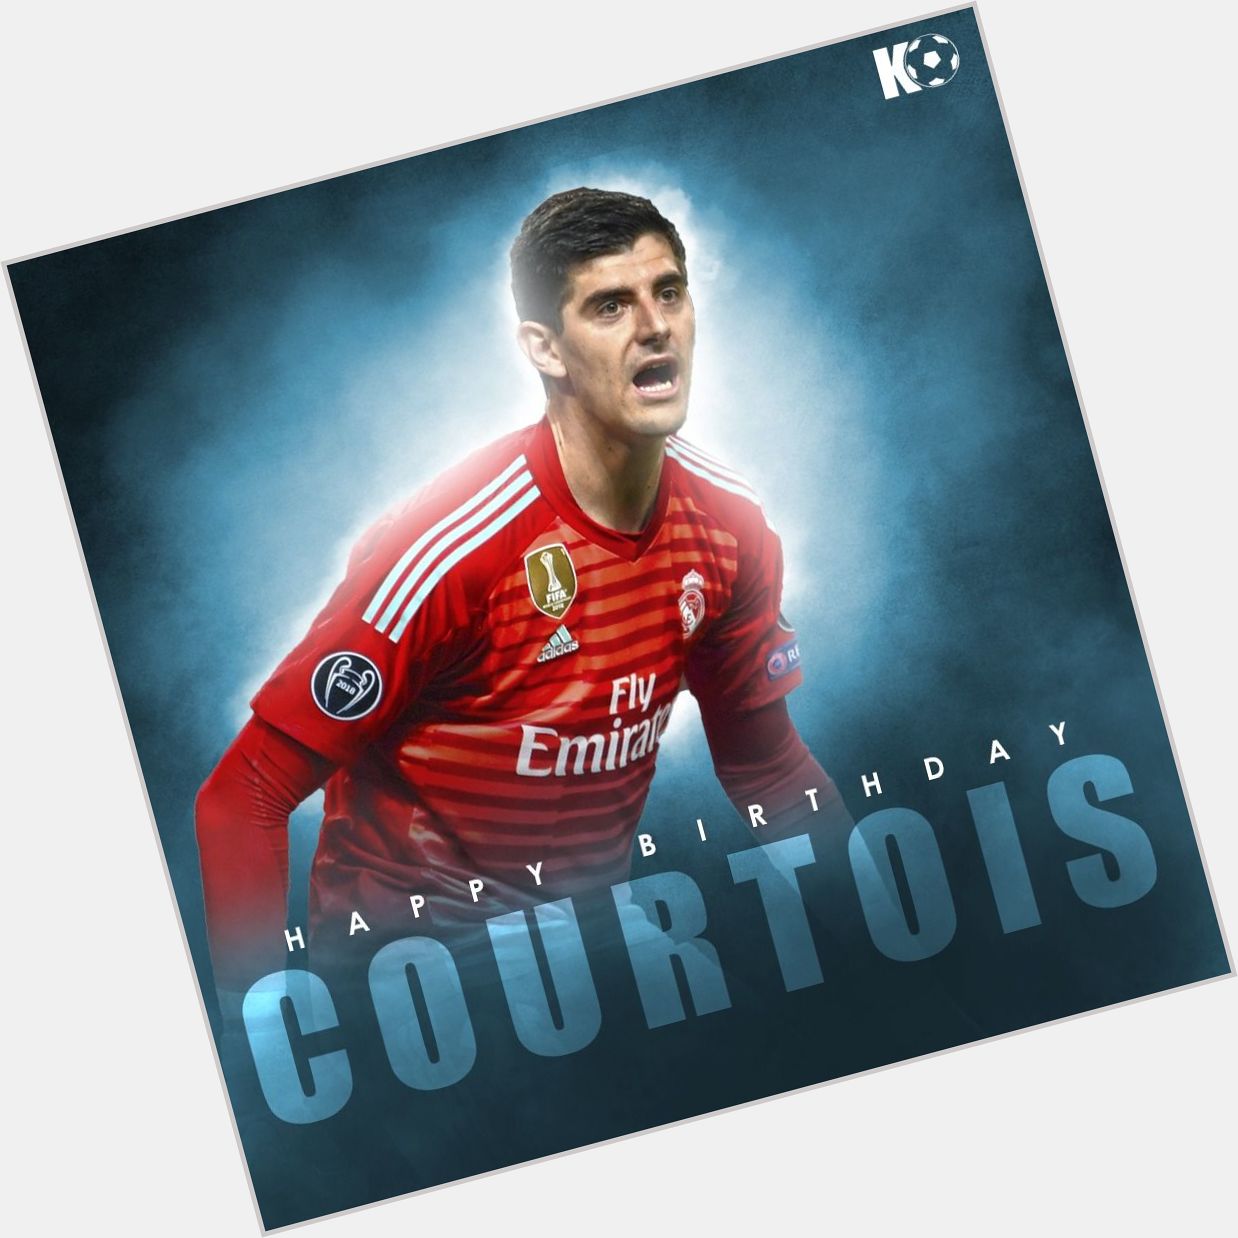 Join in wishing Thibaut Courtois a Happy Birthday! 